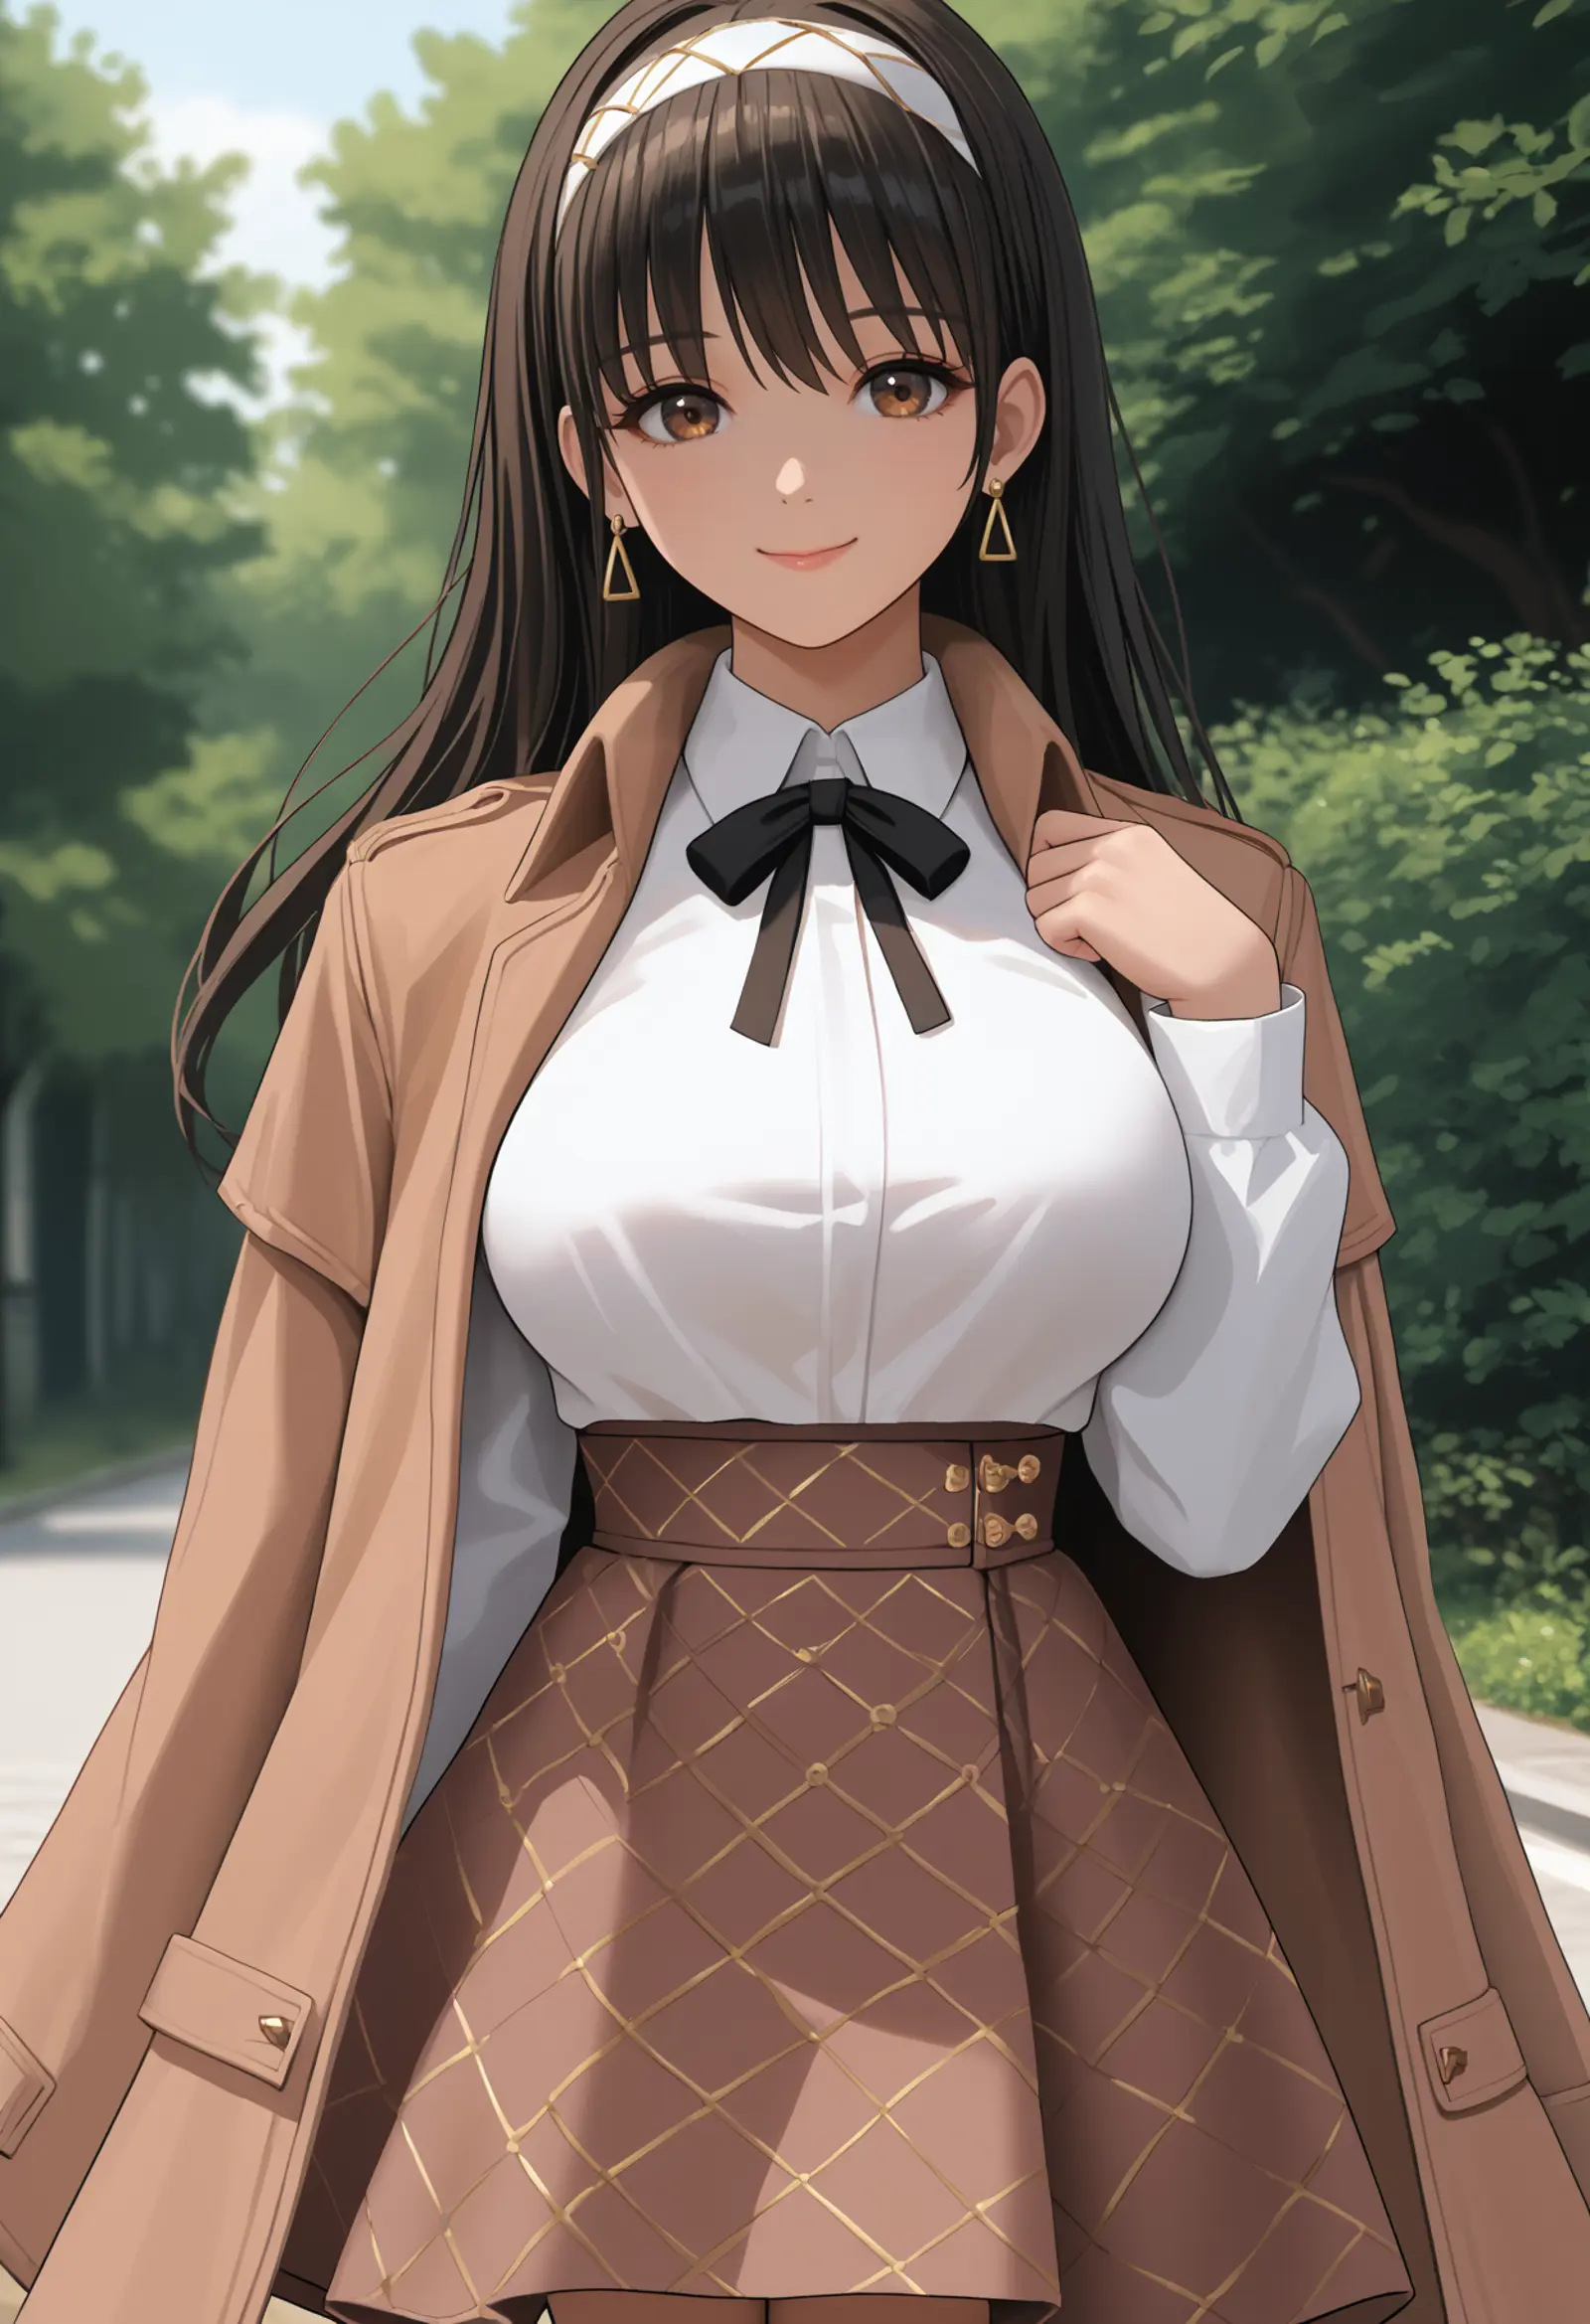 A young woman with long dark hair and brown eyes standing on a pathway surrounded by dense greenery. She is dressed in a stylish outfit consisting of a white hairband and blouse with a black bow at the collar, a brown skirt, an overcoat that matches the skirt and two golden triangular earrings. 